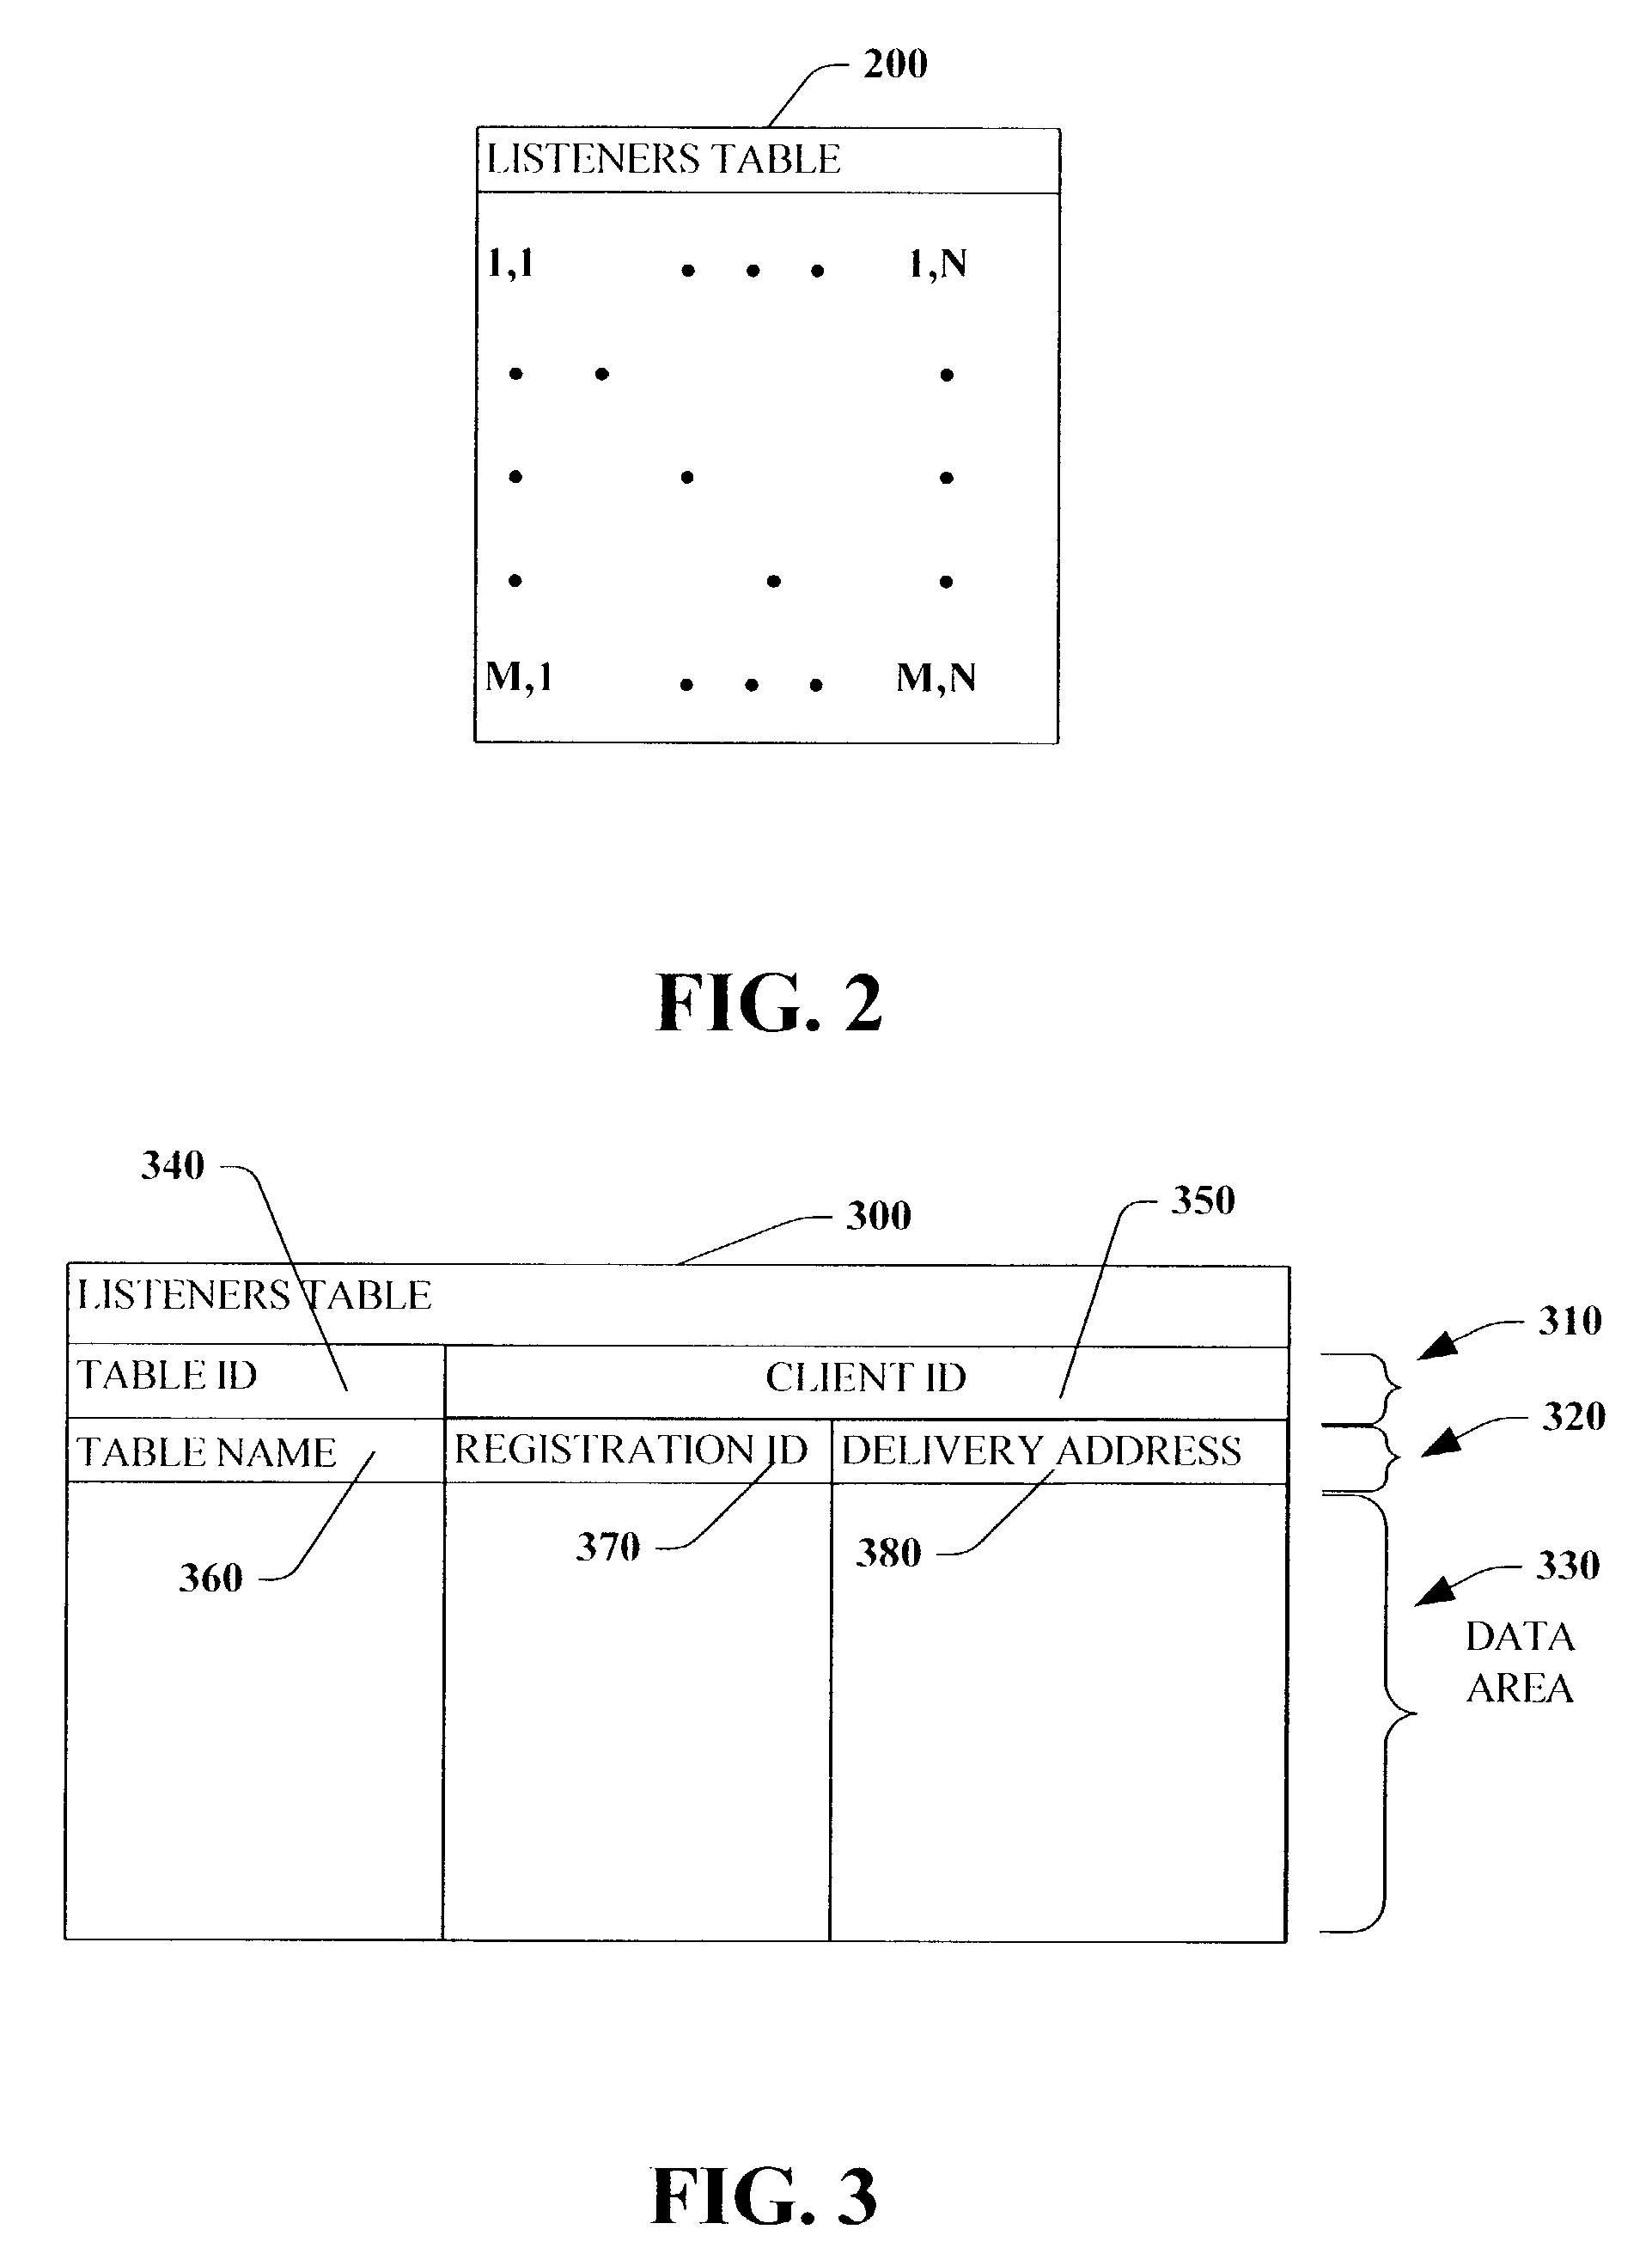 Systems and methods for employing a trigger-based mechanism to detect a database table change and registering to receive notification of the change